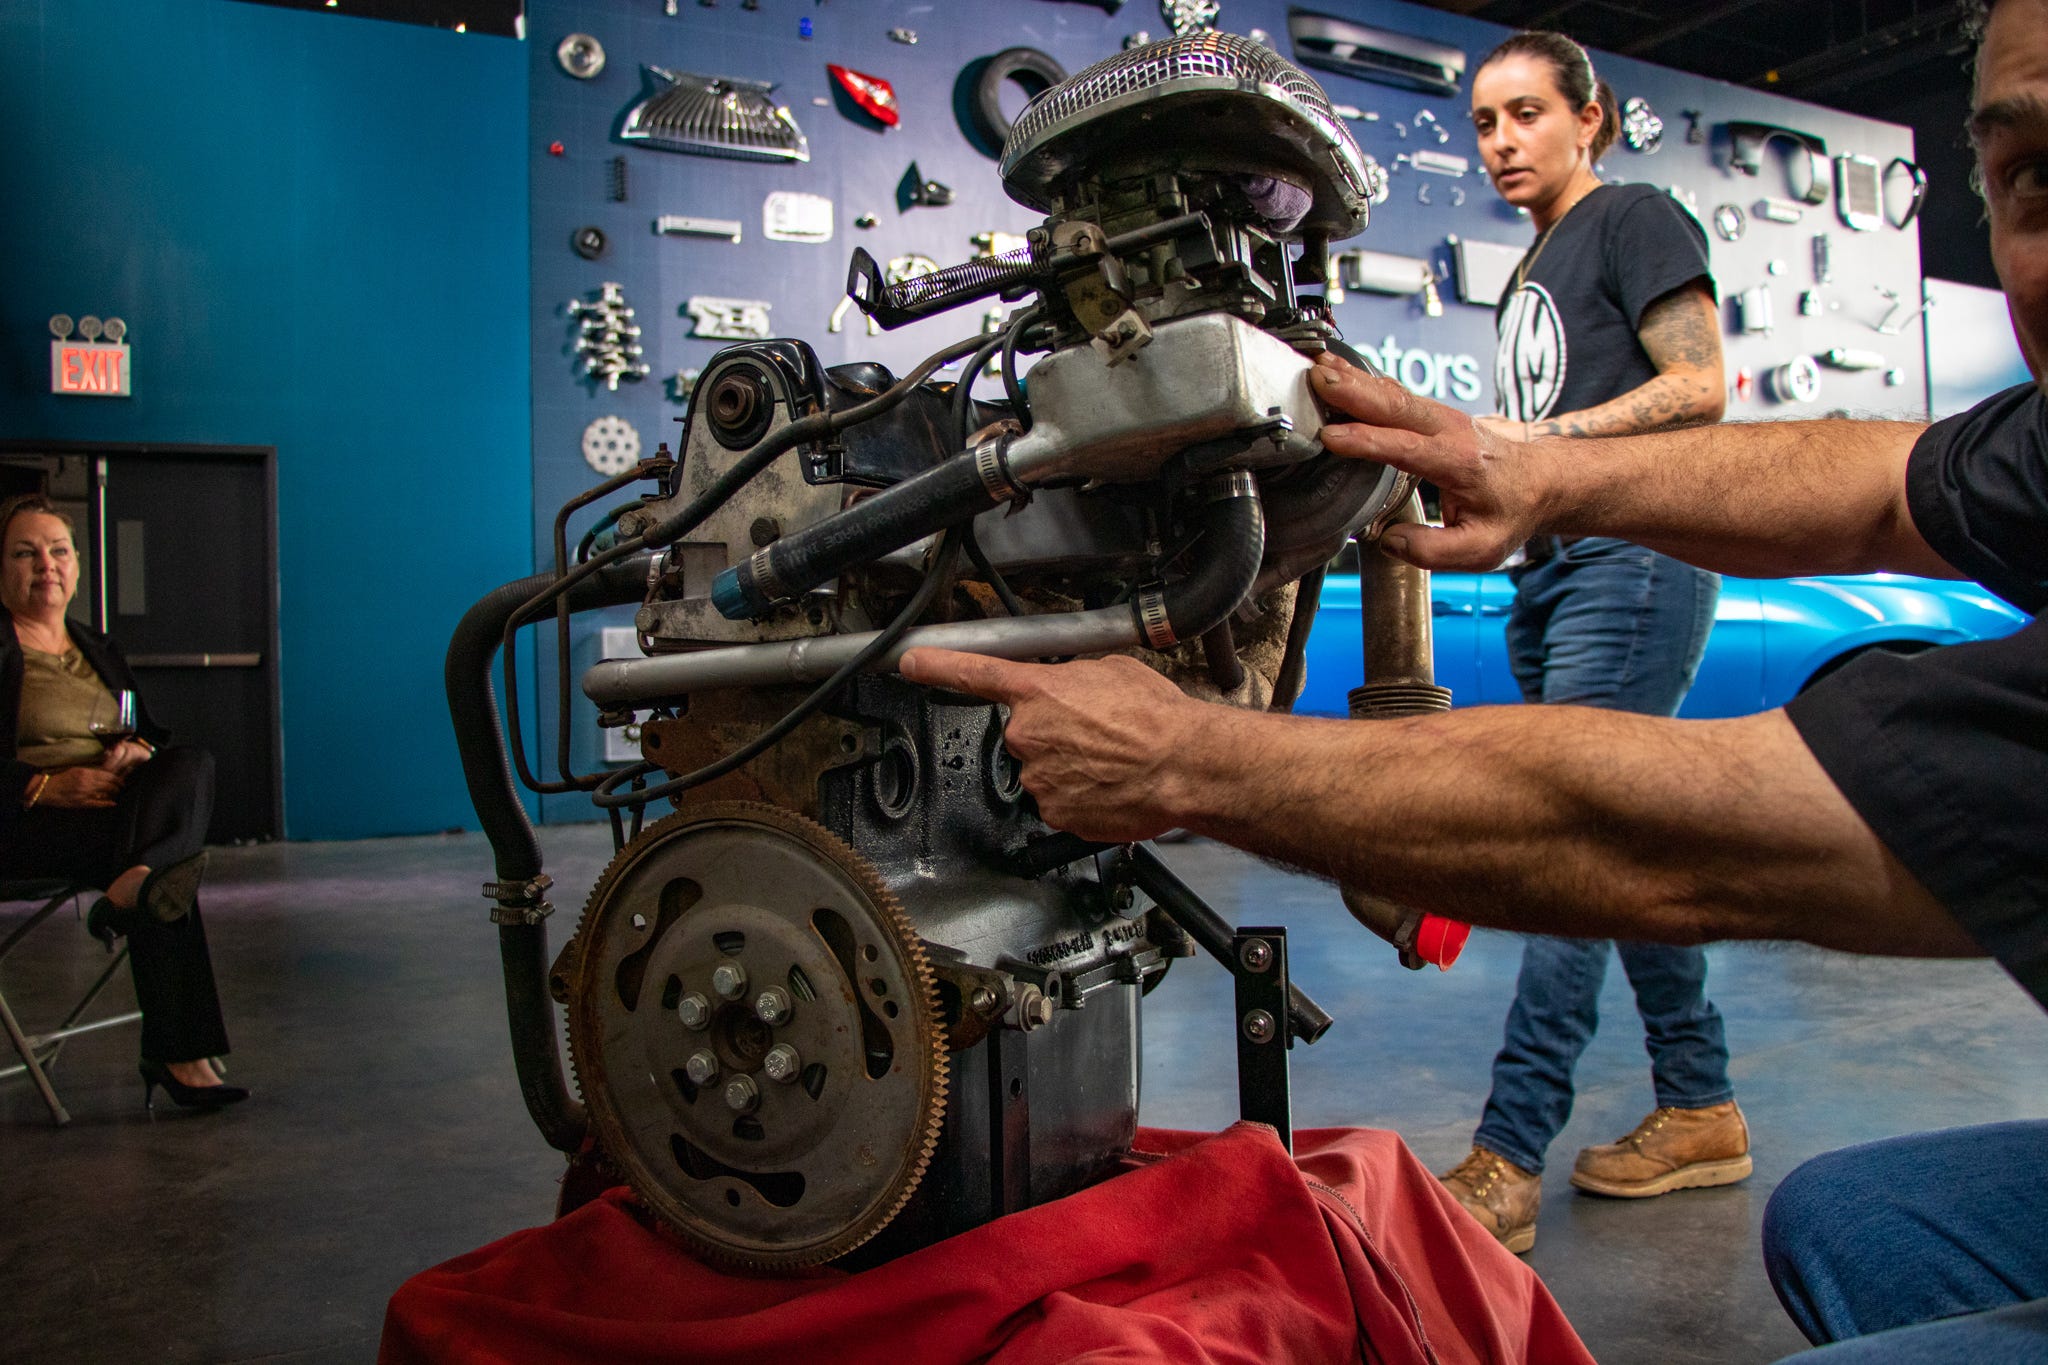 The Most Interesting DIY Cars and Engines We Saw At The 2022 eBay Auto Parts Show